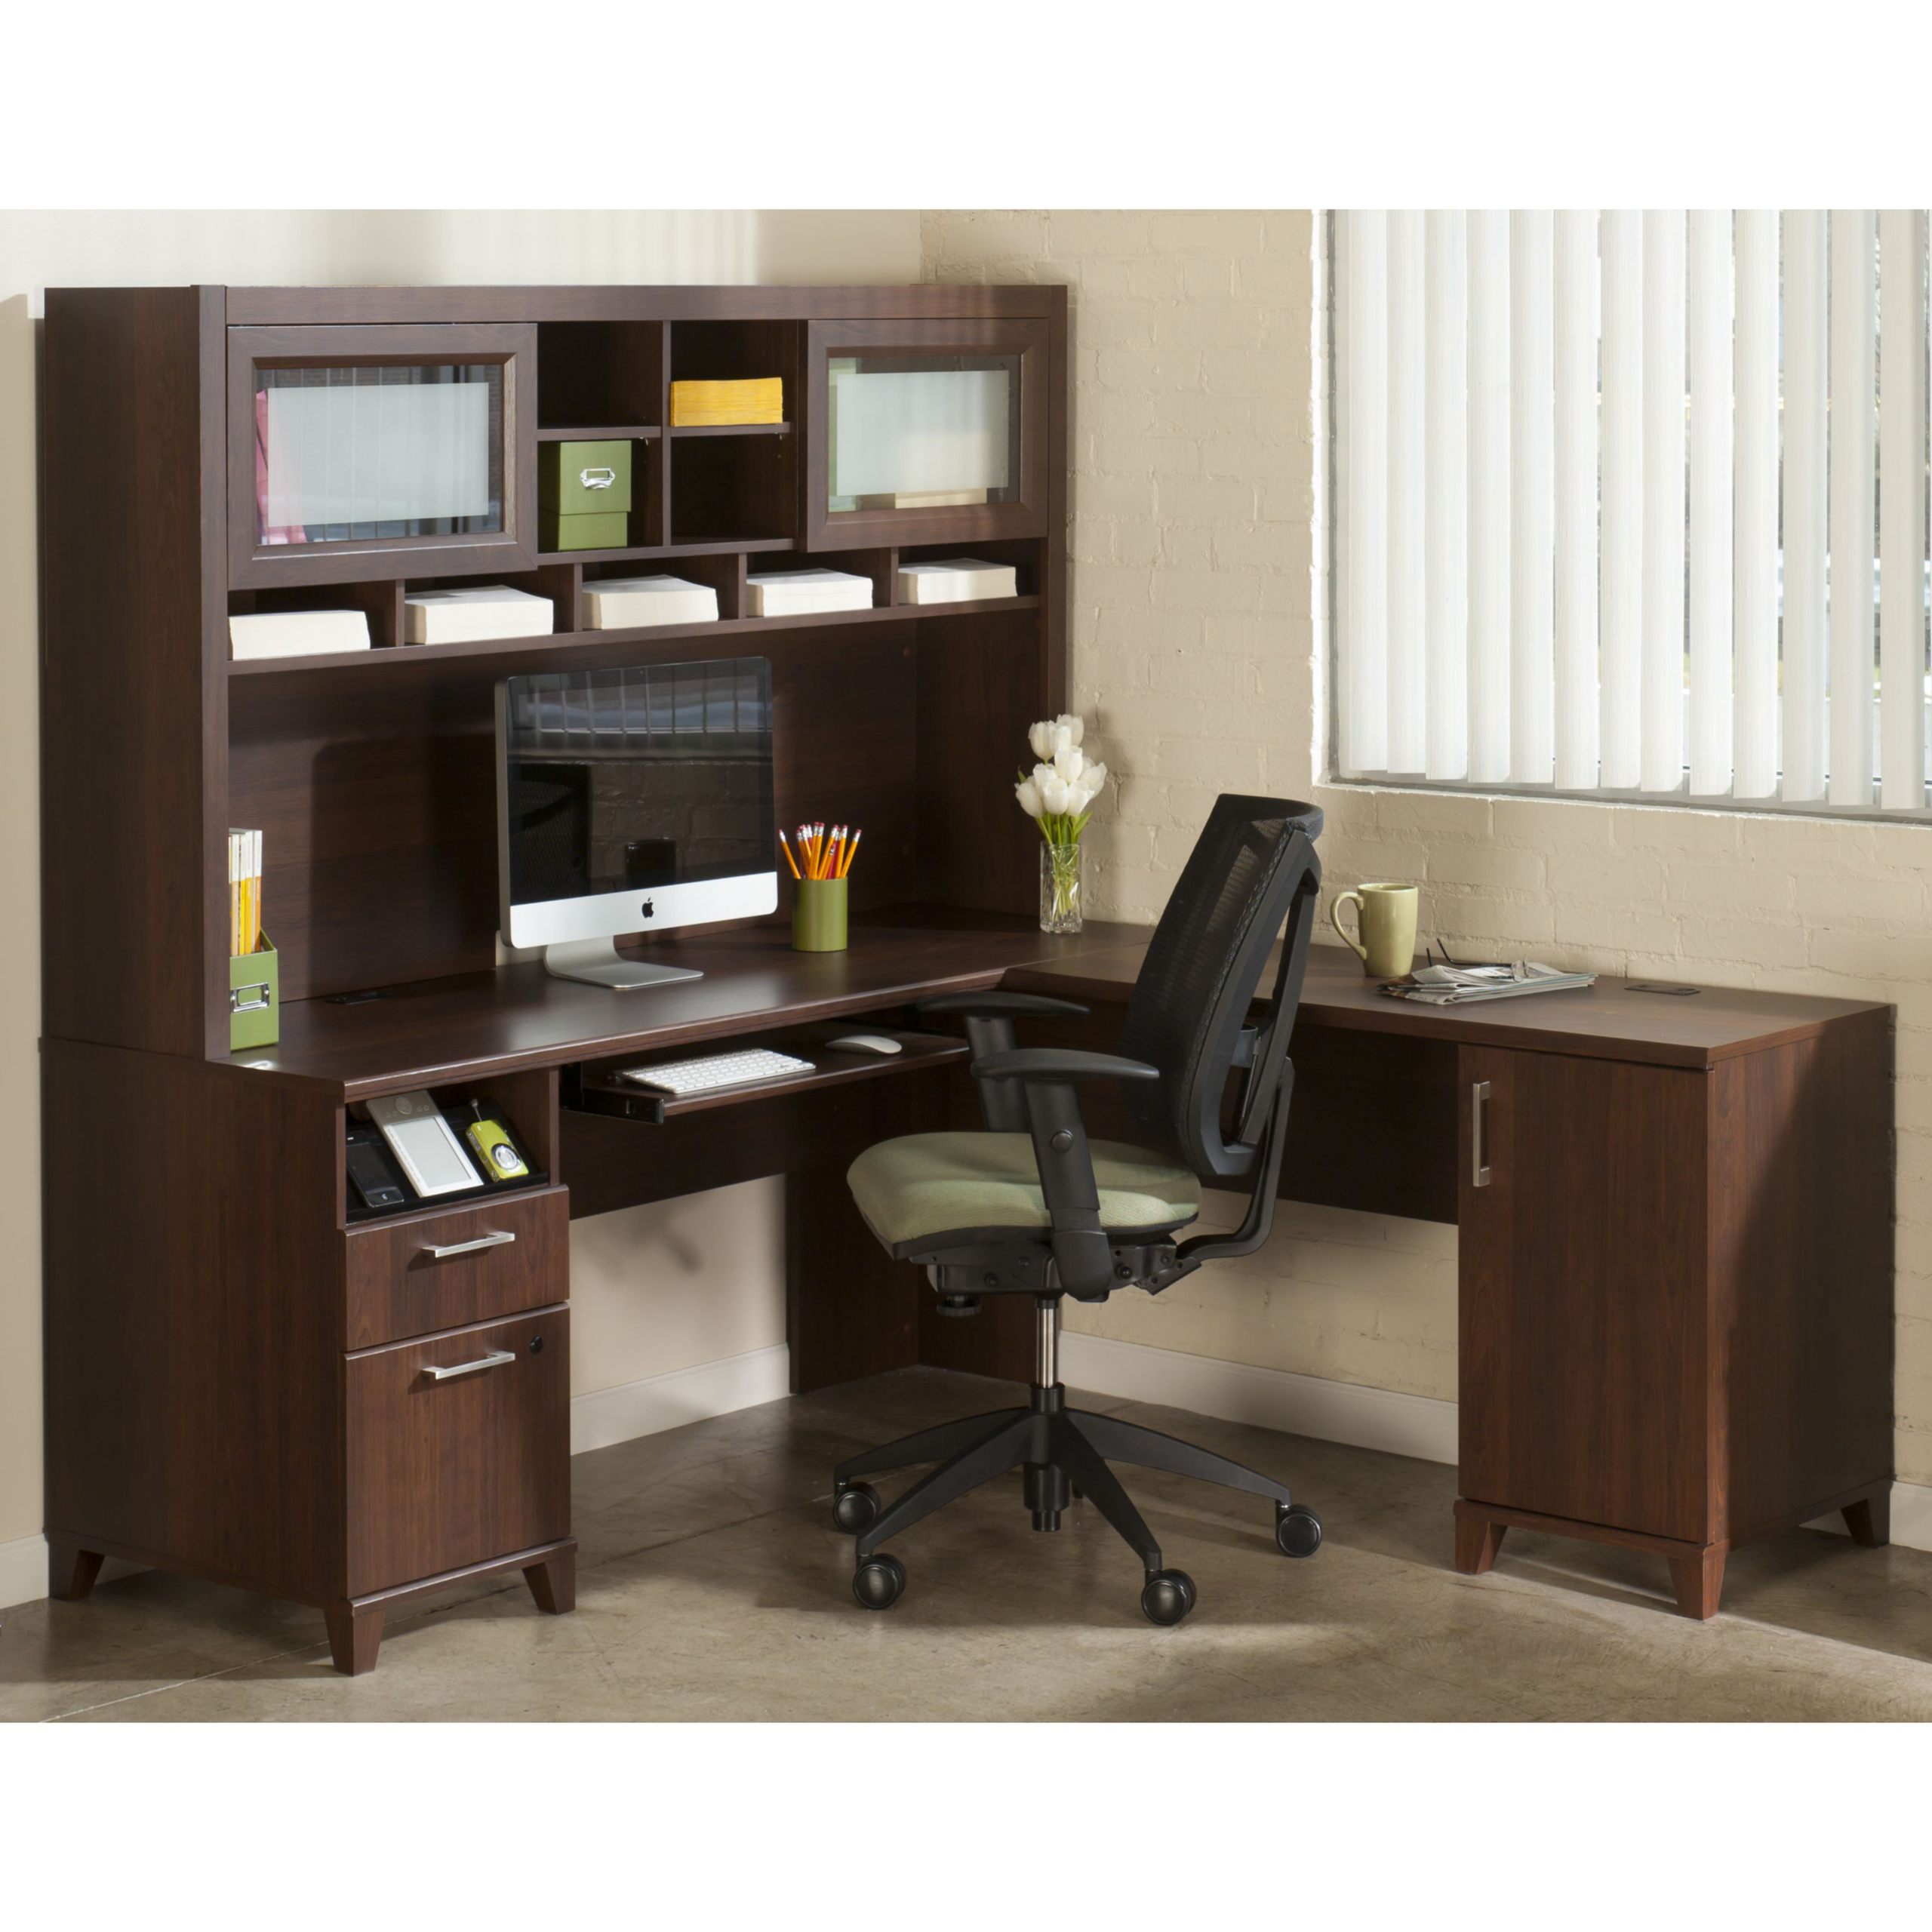 Corner Desk With Hutch Visualhunt, Corner Desk With Shelves Above And Drawers